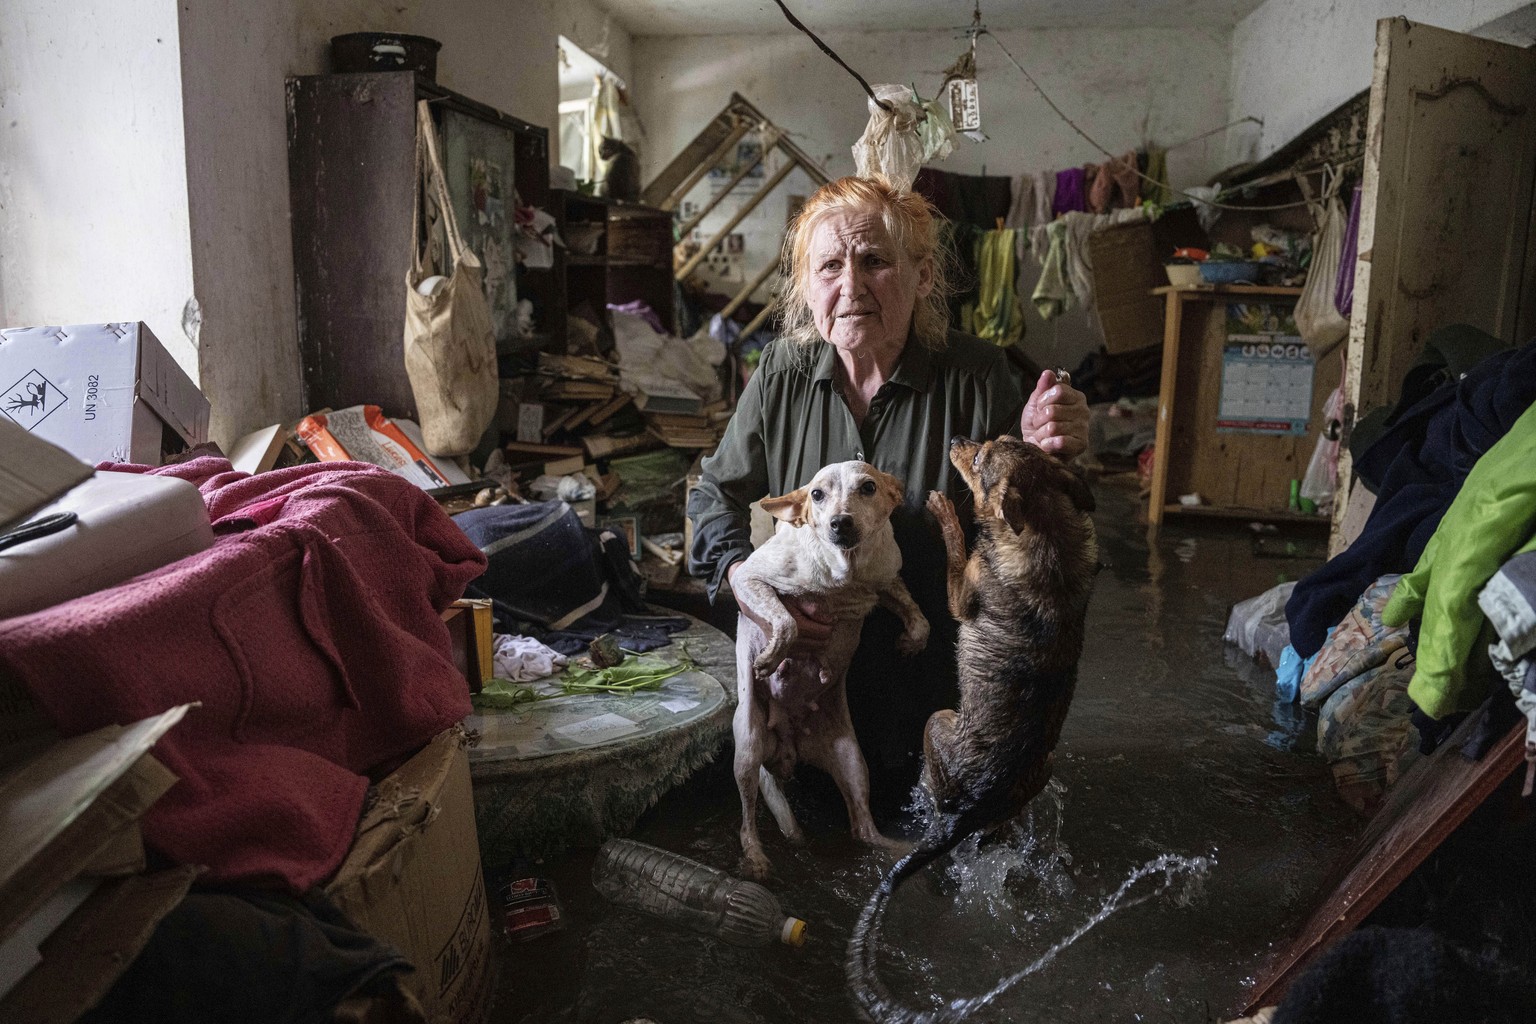 Tetiana holds her pet dogs, Tsatsa and Chunya, in her home that was flooded after the Kakhovka dam blew up overnight, in Kherson, Ukraine, on June 6, 2023. (AP Photo/Evgeniy Maloletka)